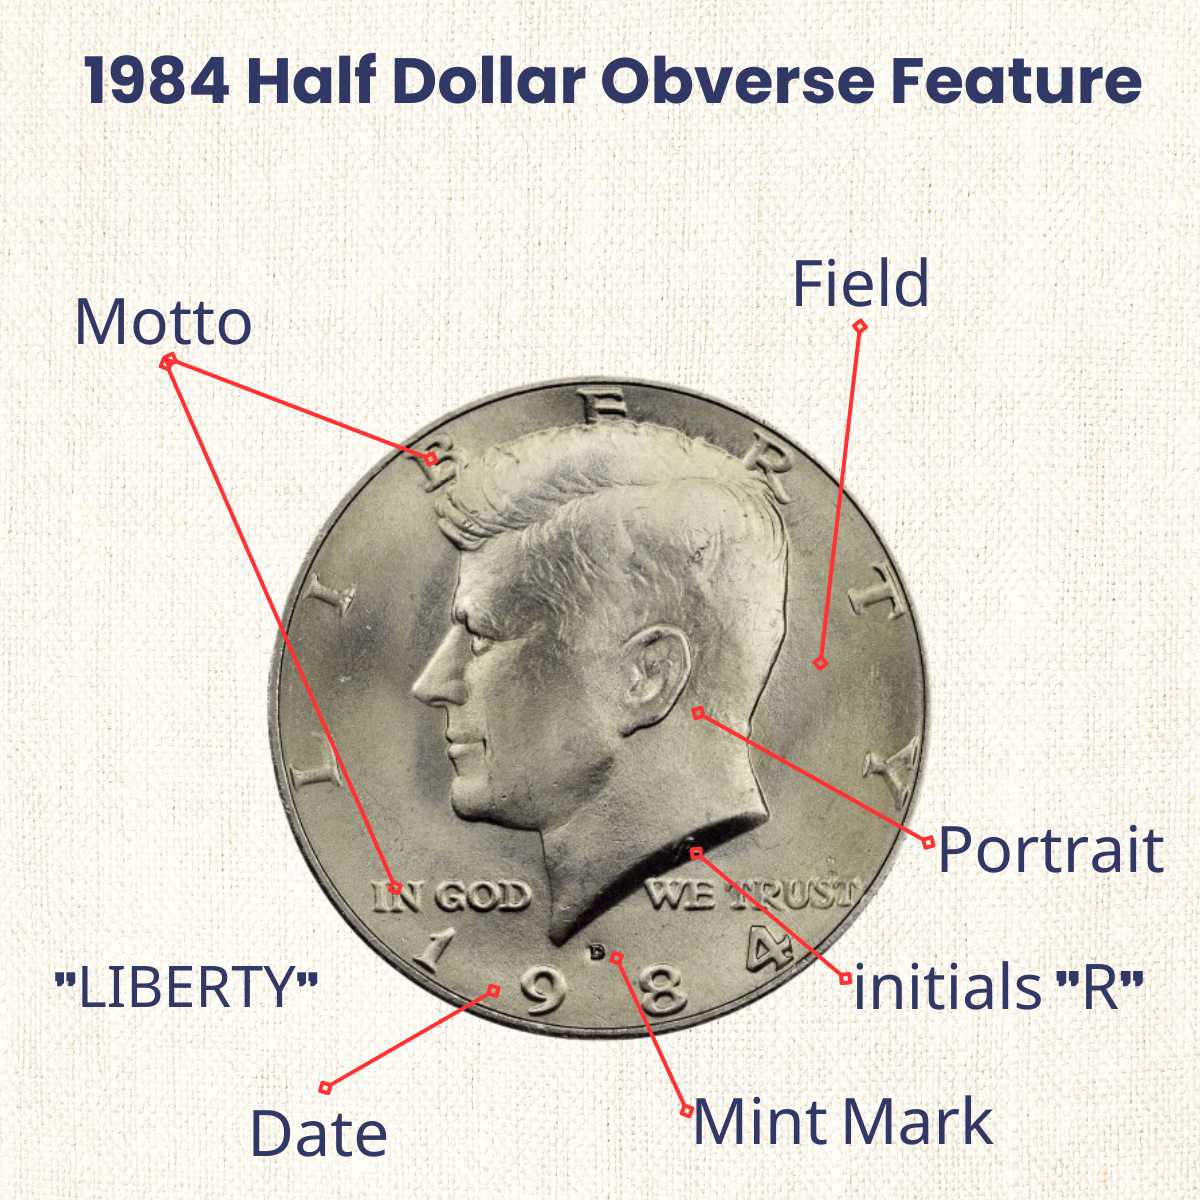 1984 Half Dollar Obverse Design and Features